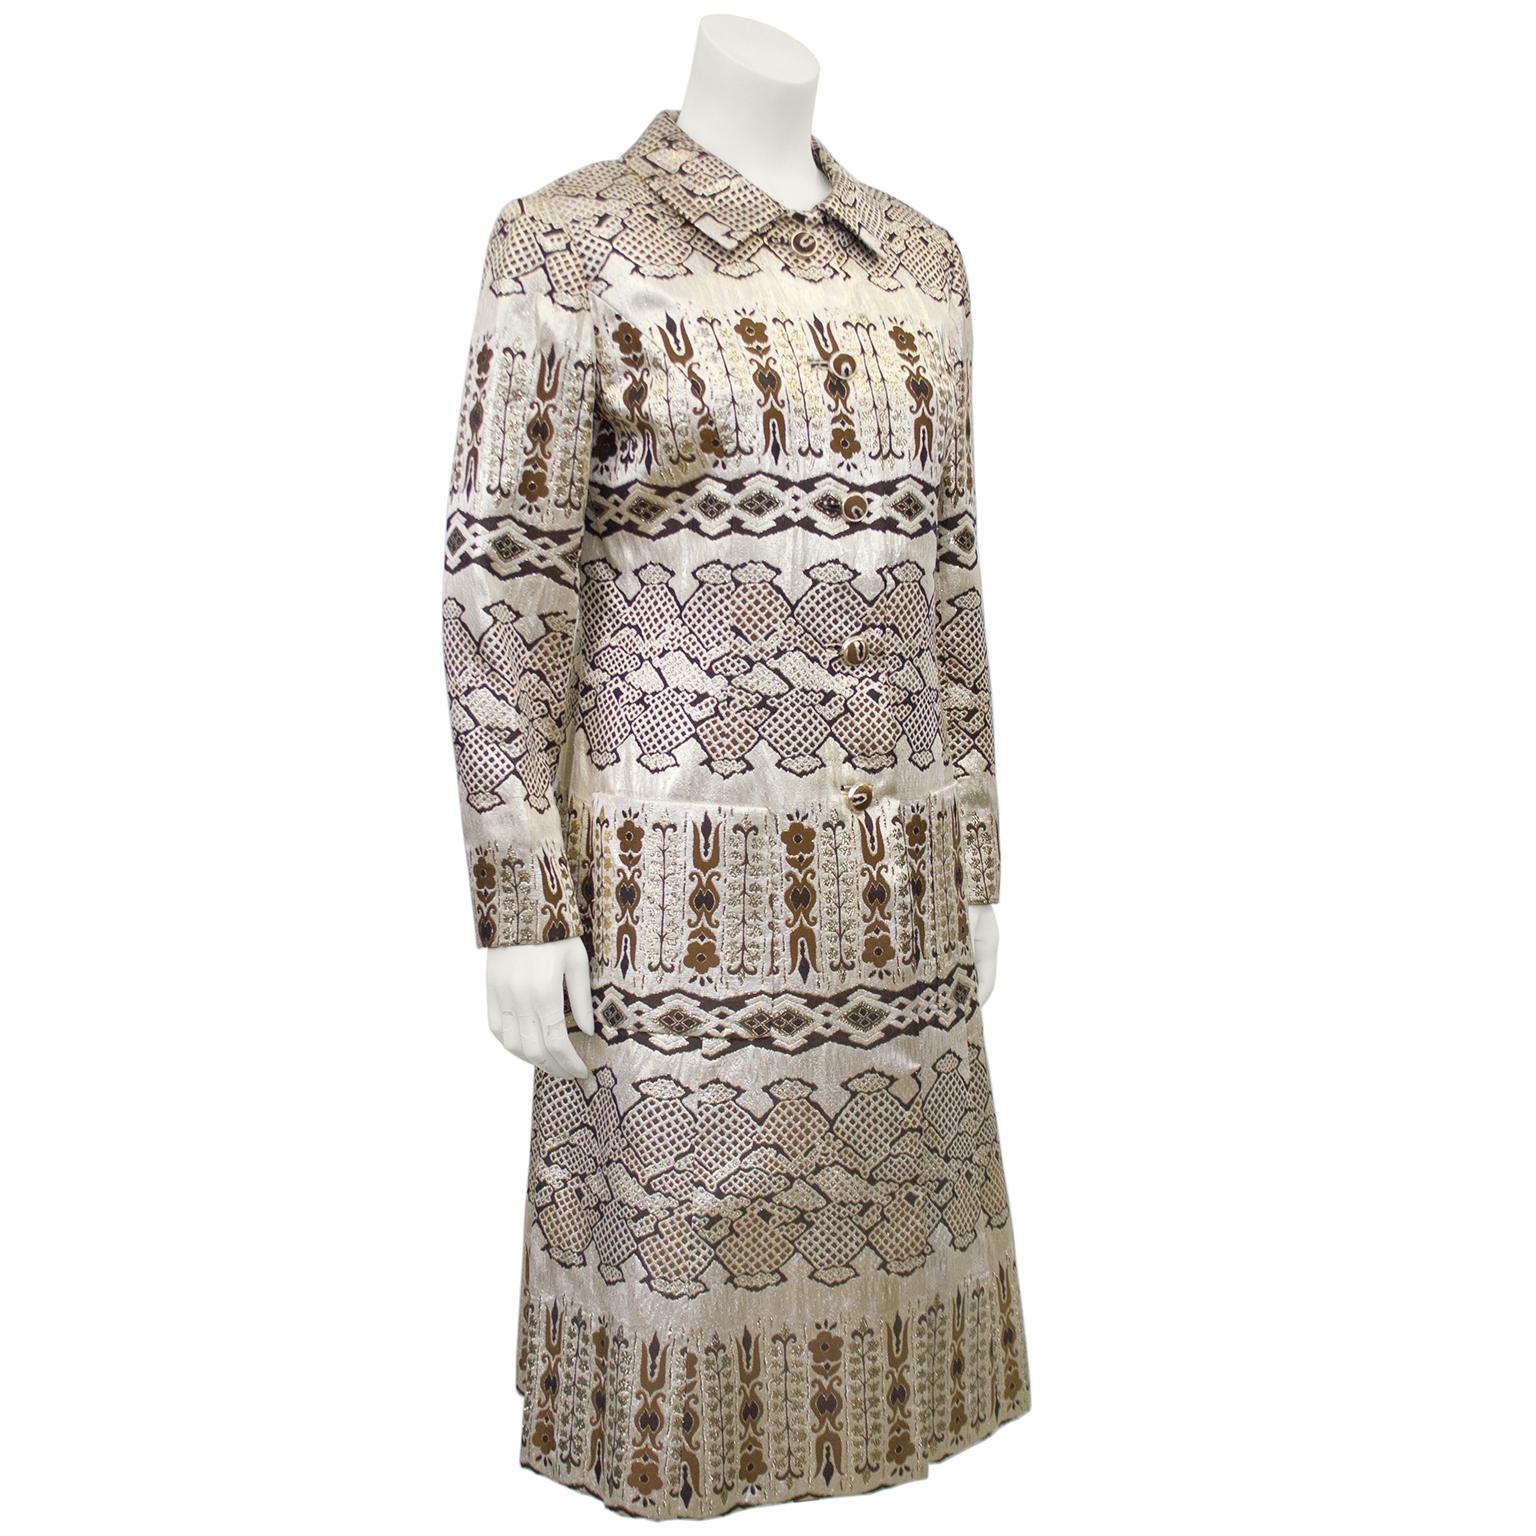 Beautiful bronze and gold brocade coat from the 1960s. The label says, 